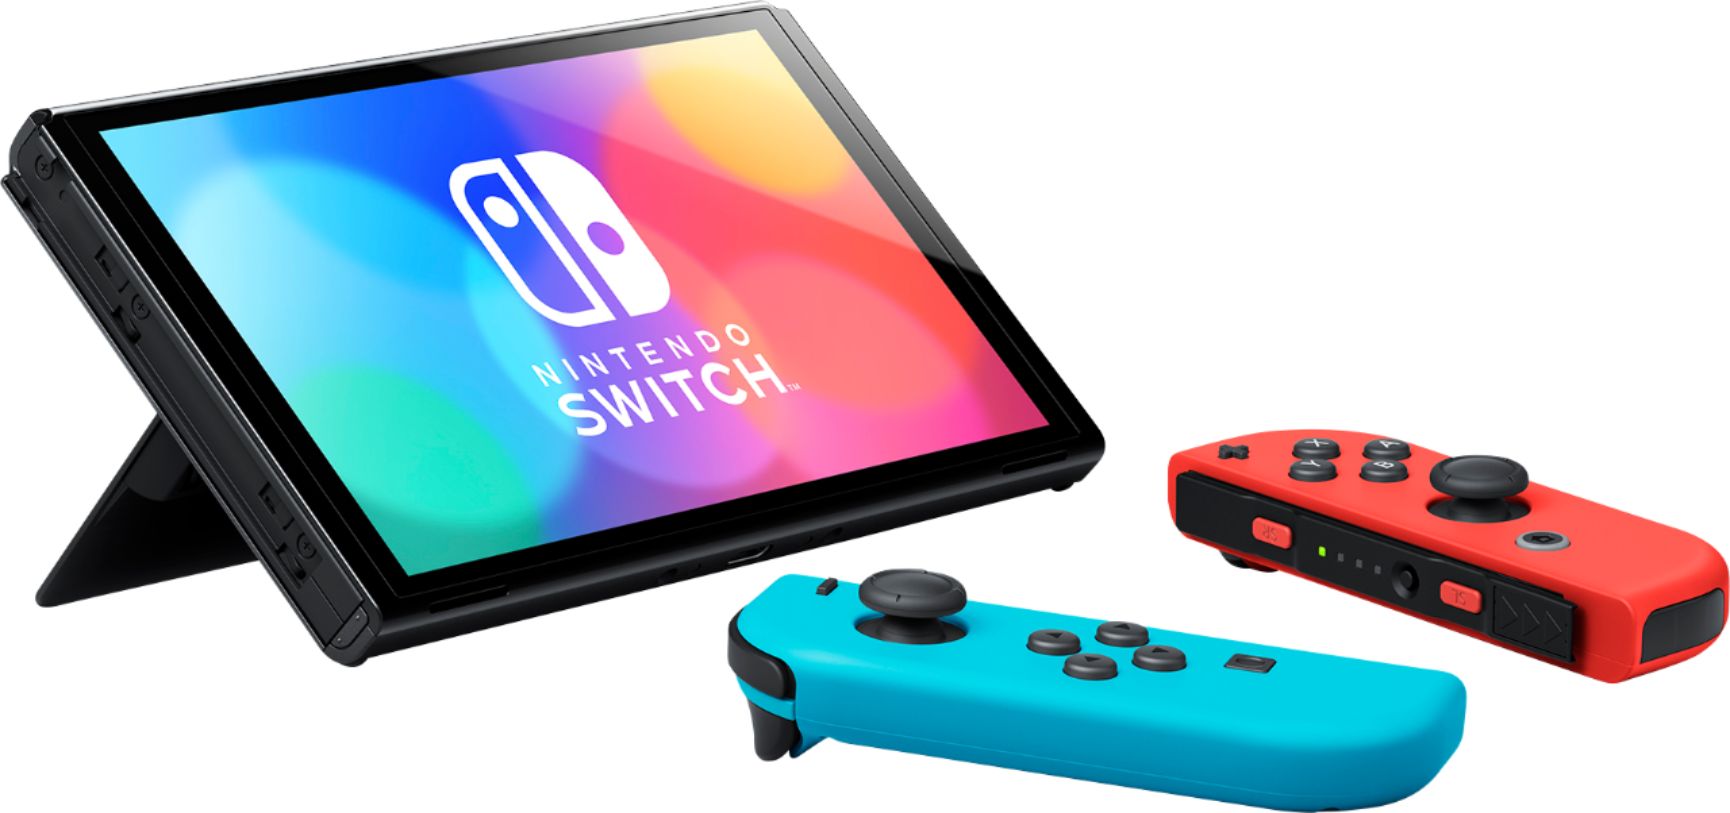 2022 New Nintendo Switch OLED Model Neon Red Blue with Fire Emblem: Three Houses and Mytrix Full Body Skin Sticker for NS OLED Console, Dock and Joycons - Sakura Pink